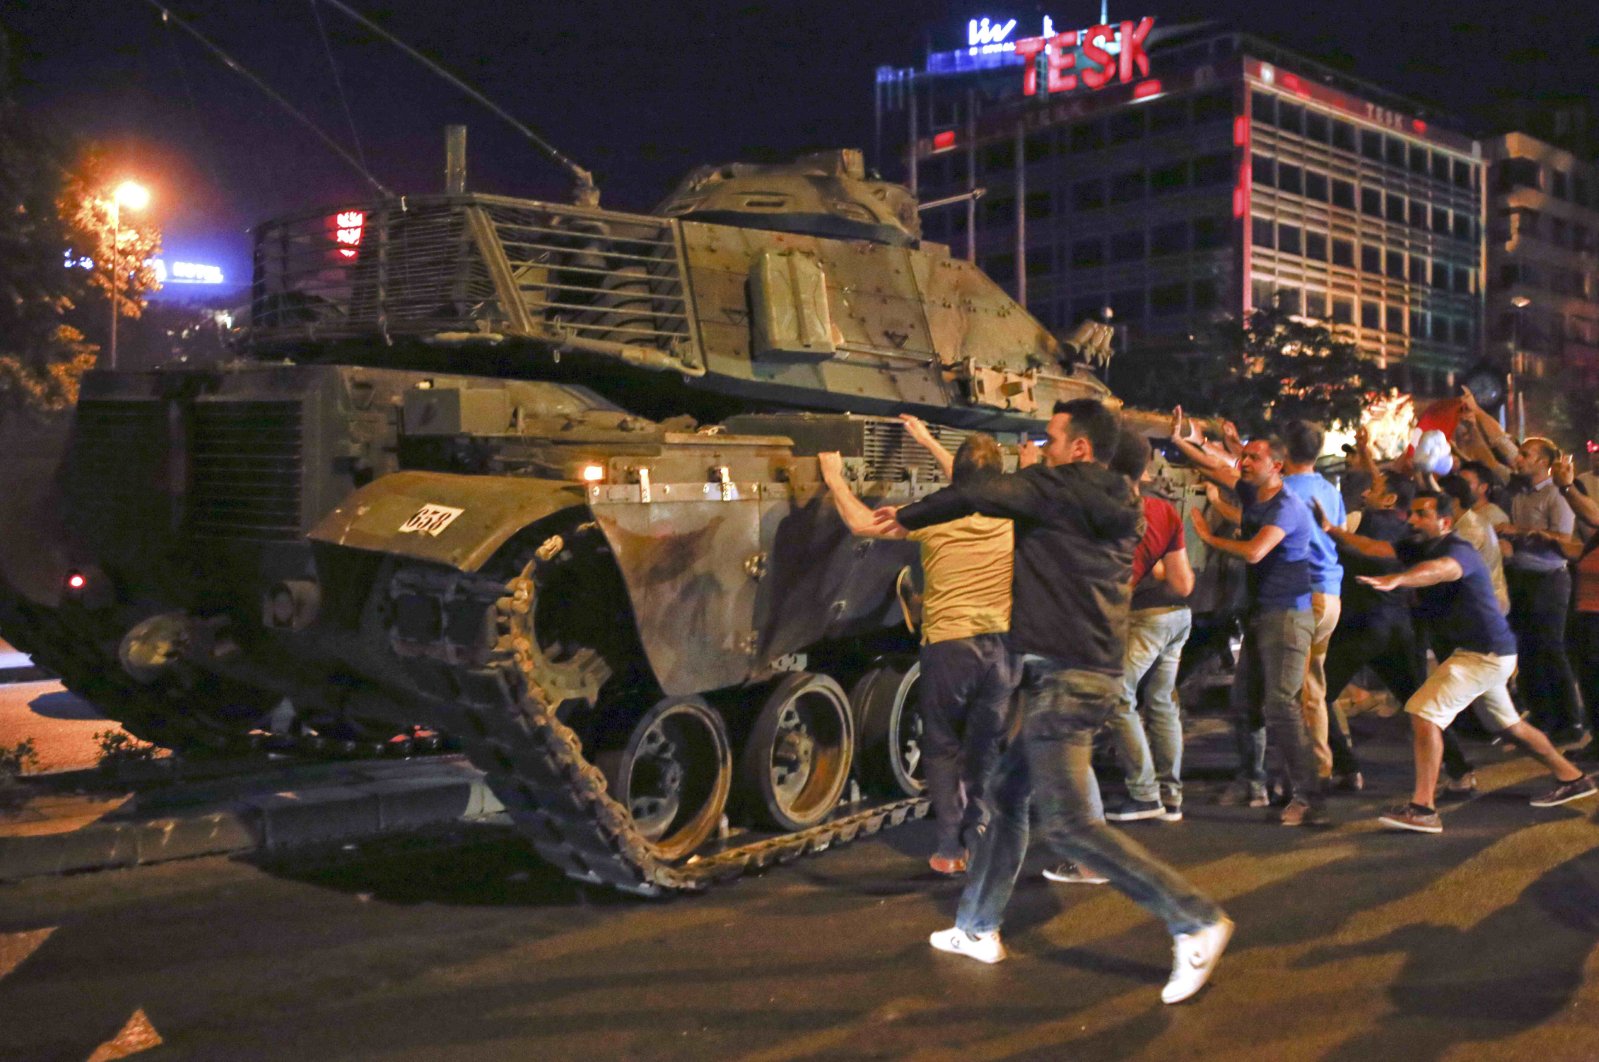 People confront a tank during the failed coup attempt, in Ankara, Turkey, July 16, 2016. (Reuters Photo)